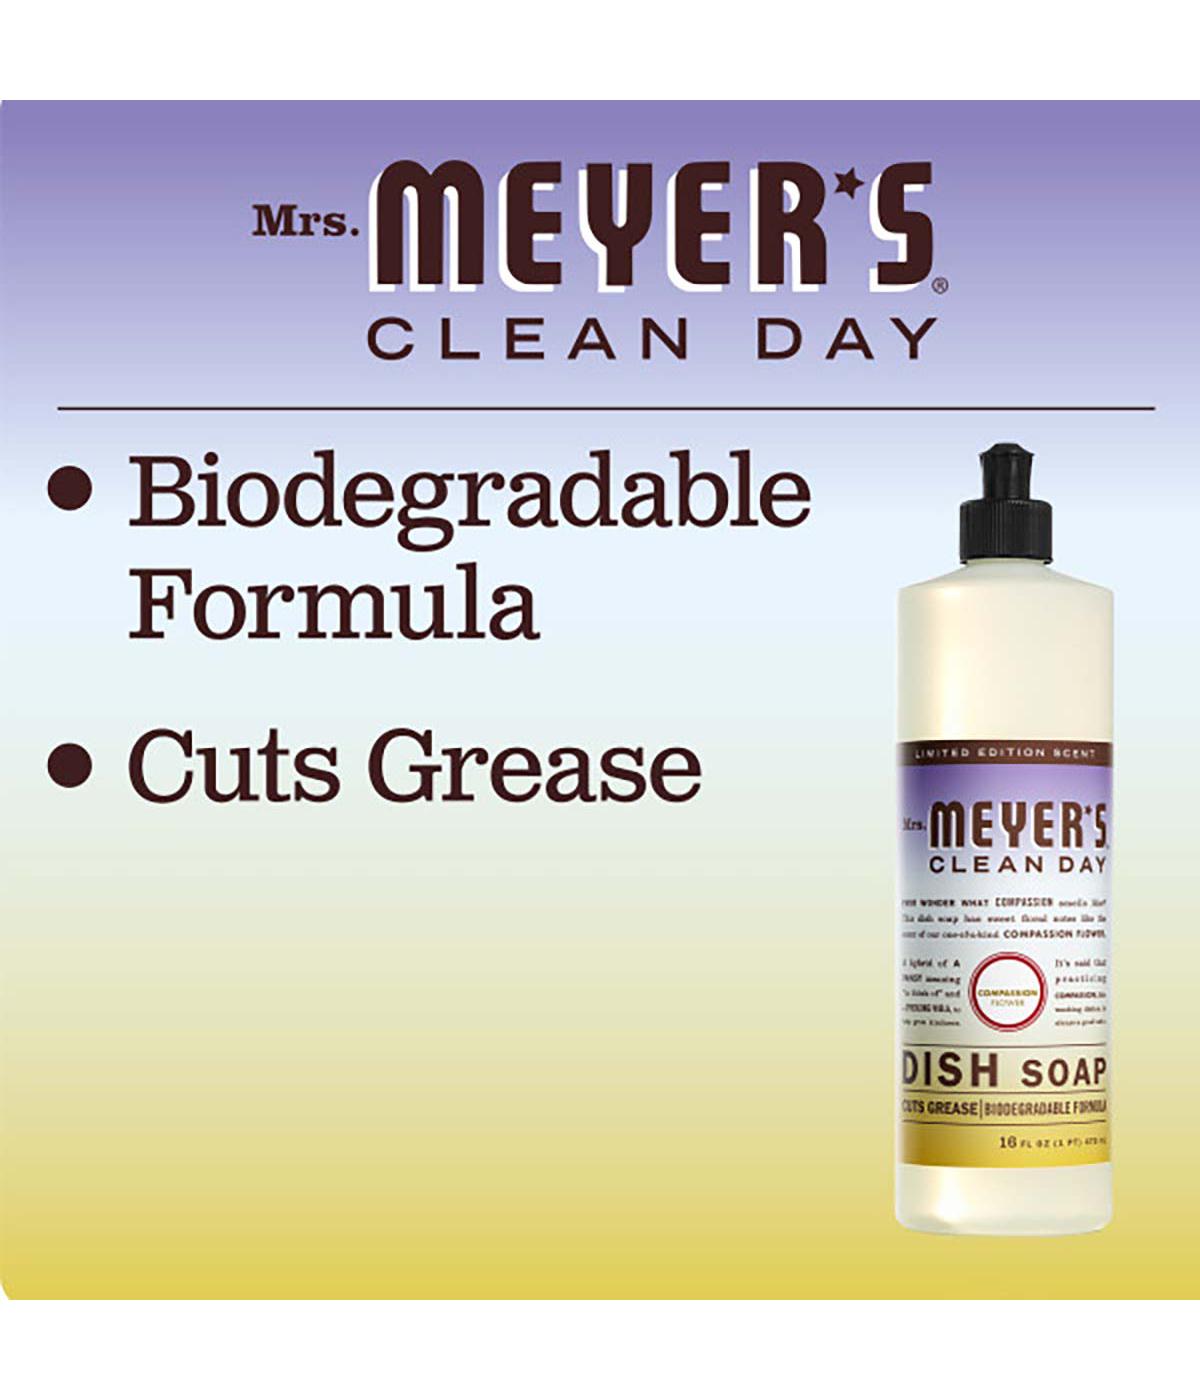 Mrs. Meyer's Clean Day Compassion Flower Scent Dish Soap; image 2 of 5